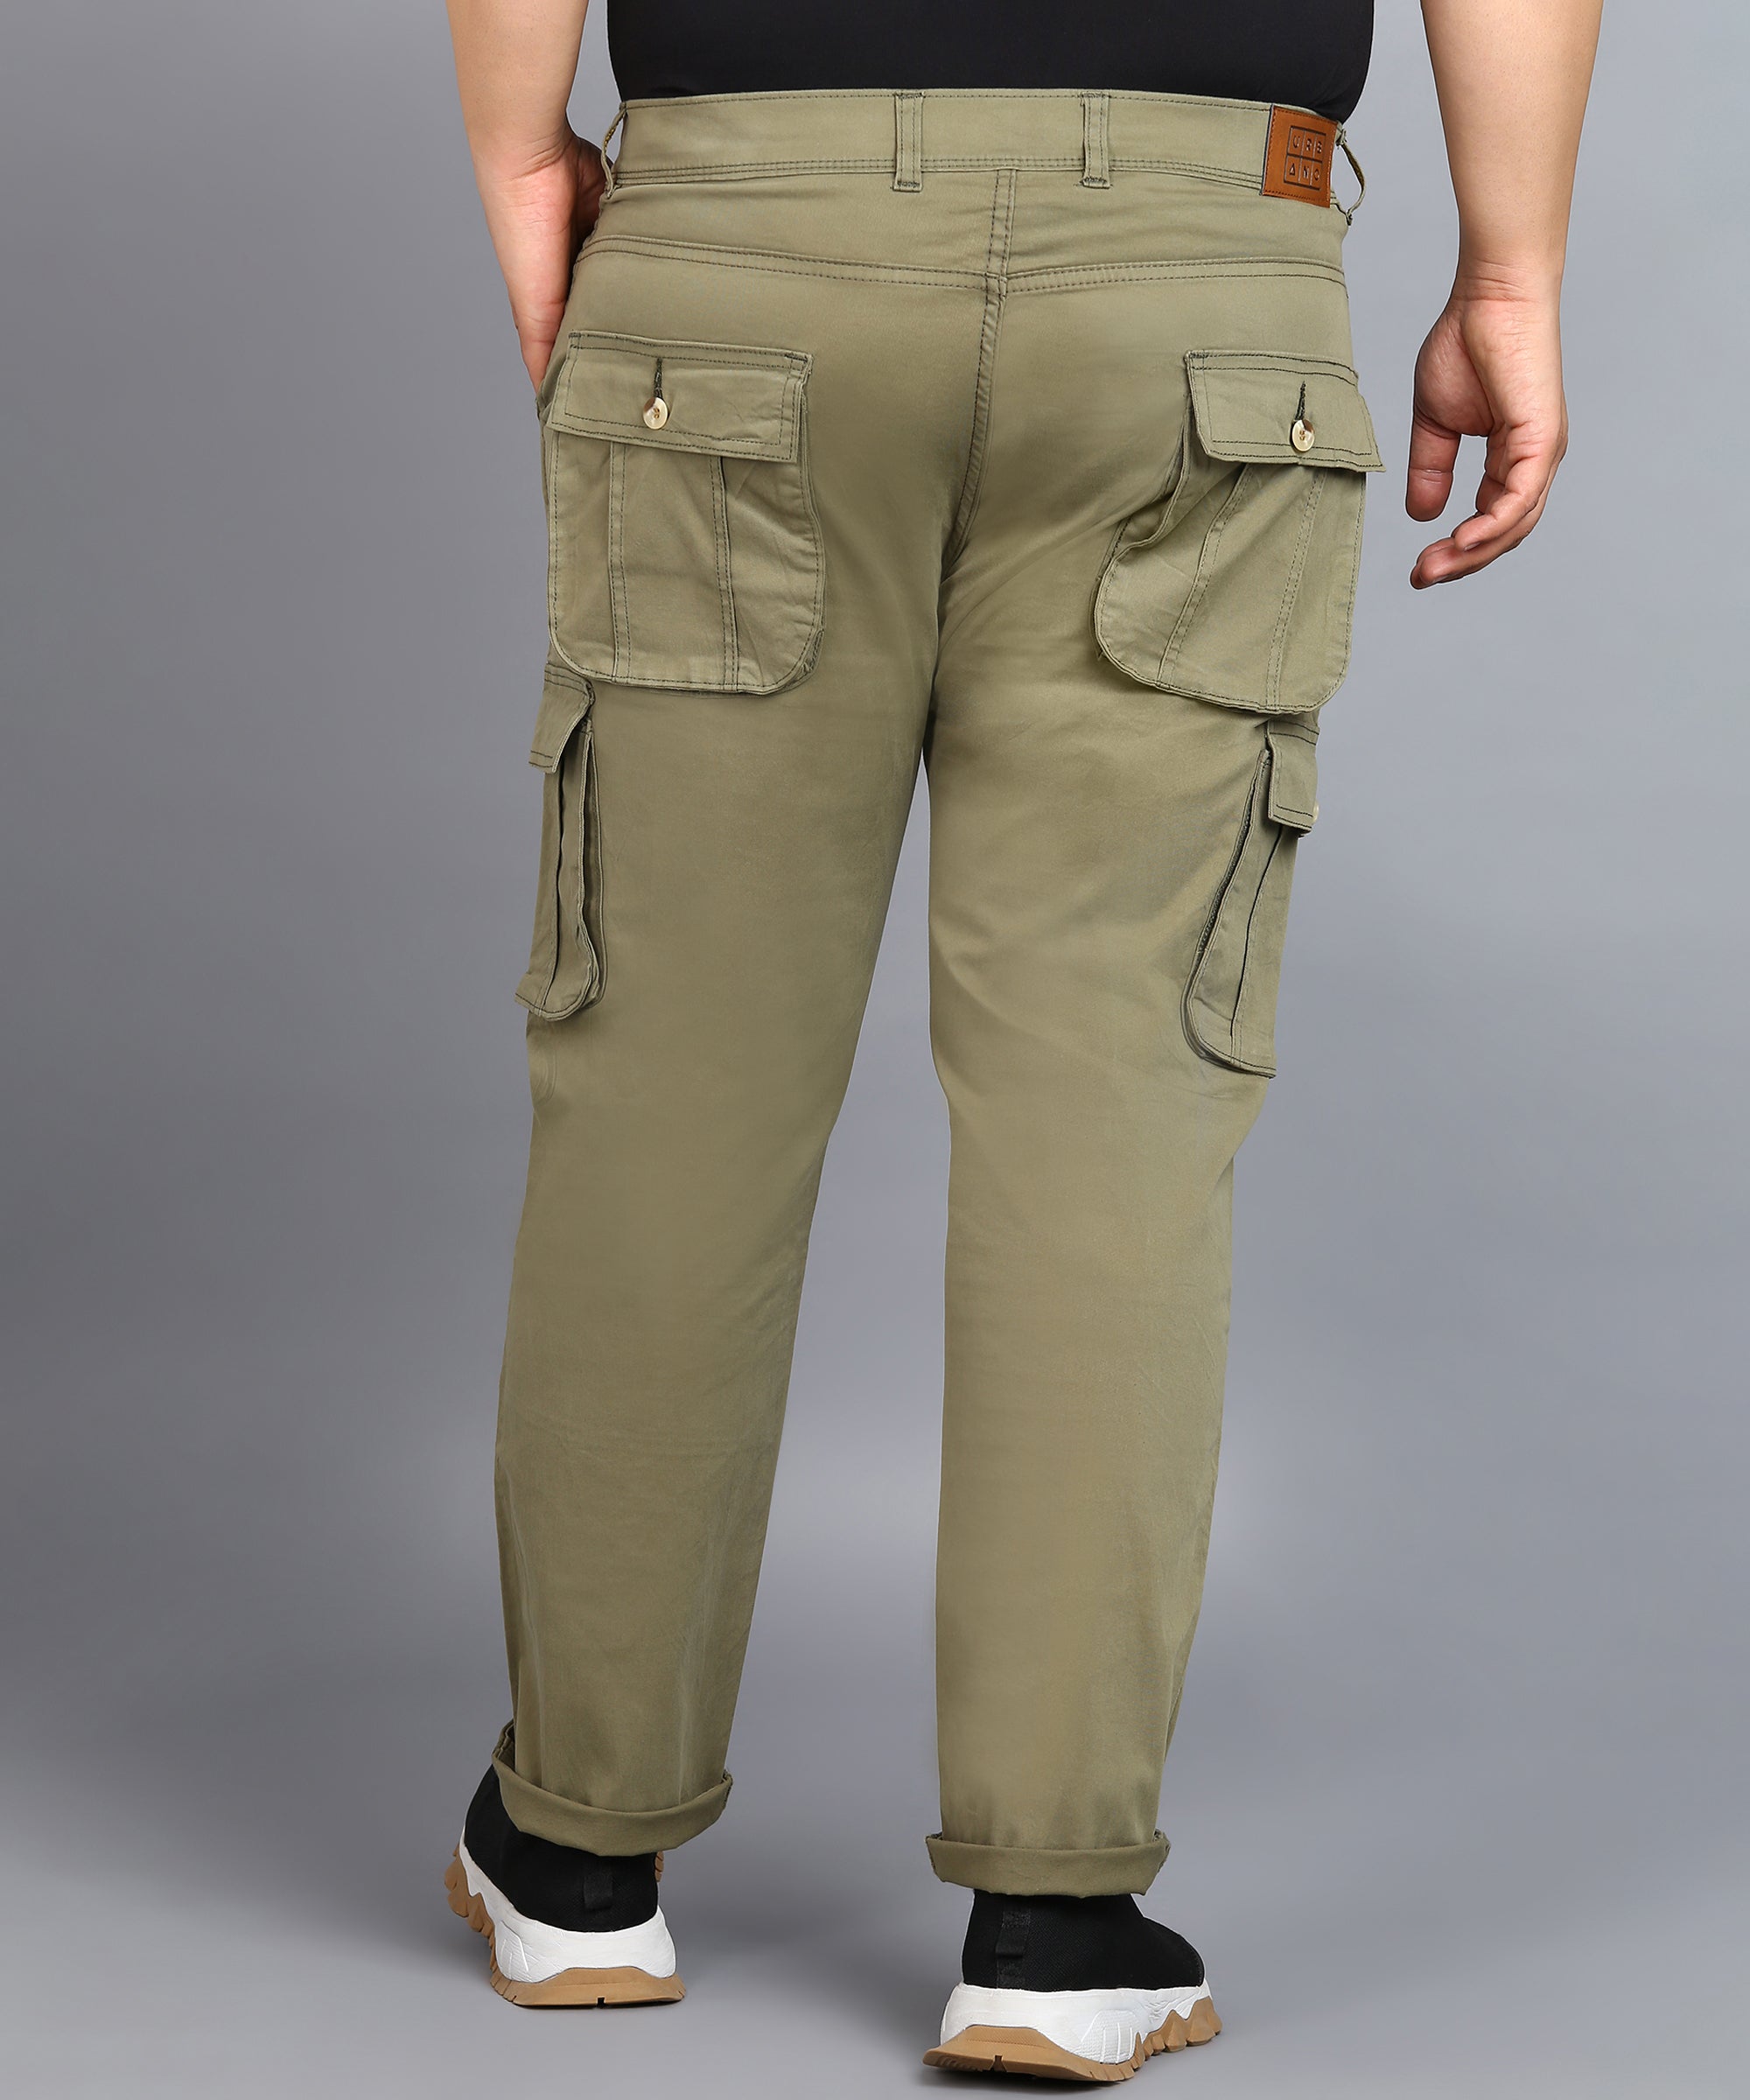 Plus Men's Olive Green Regular Fit Solid Cargo Chino Pant with 6 Pockets